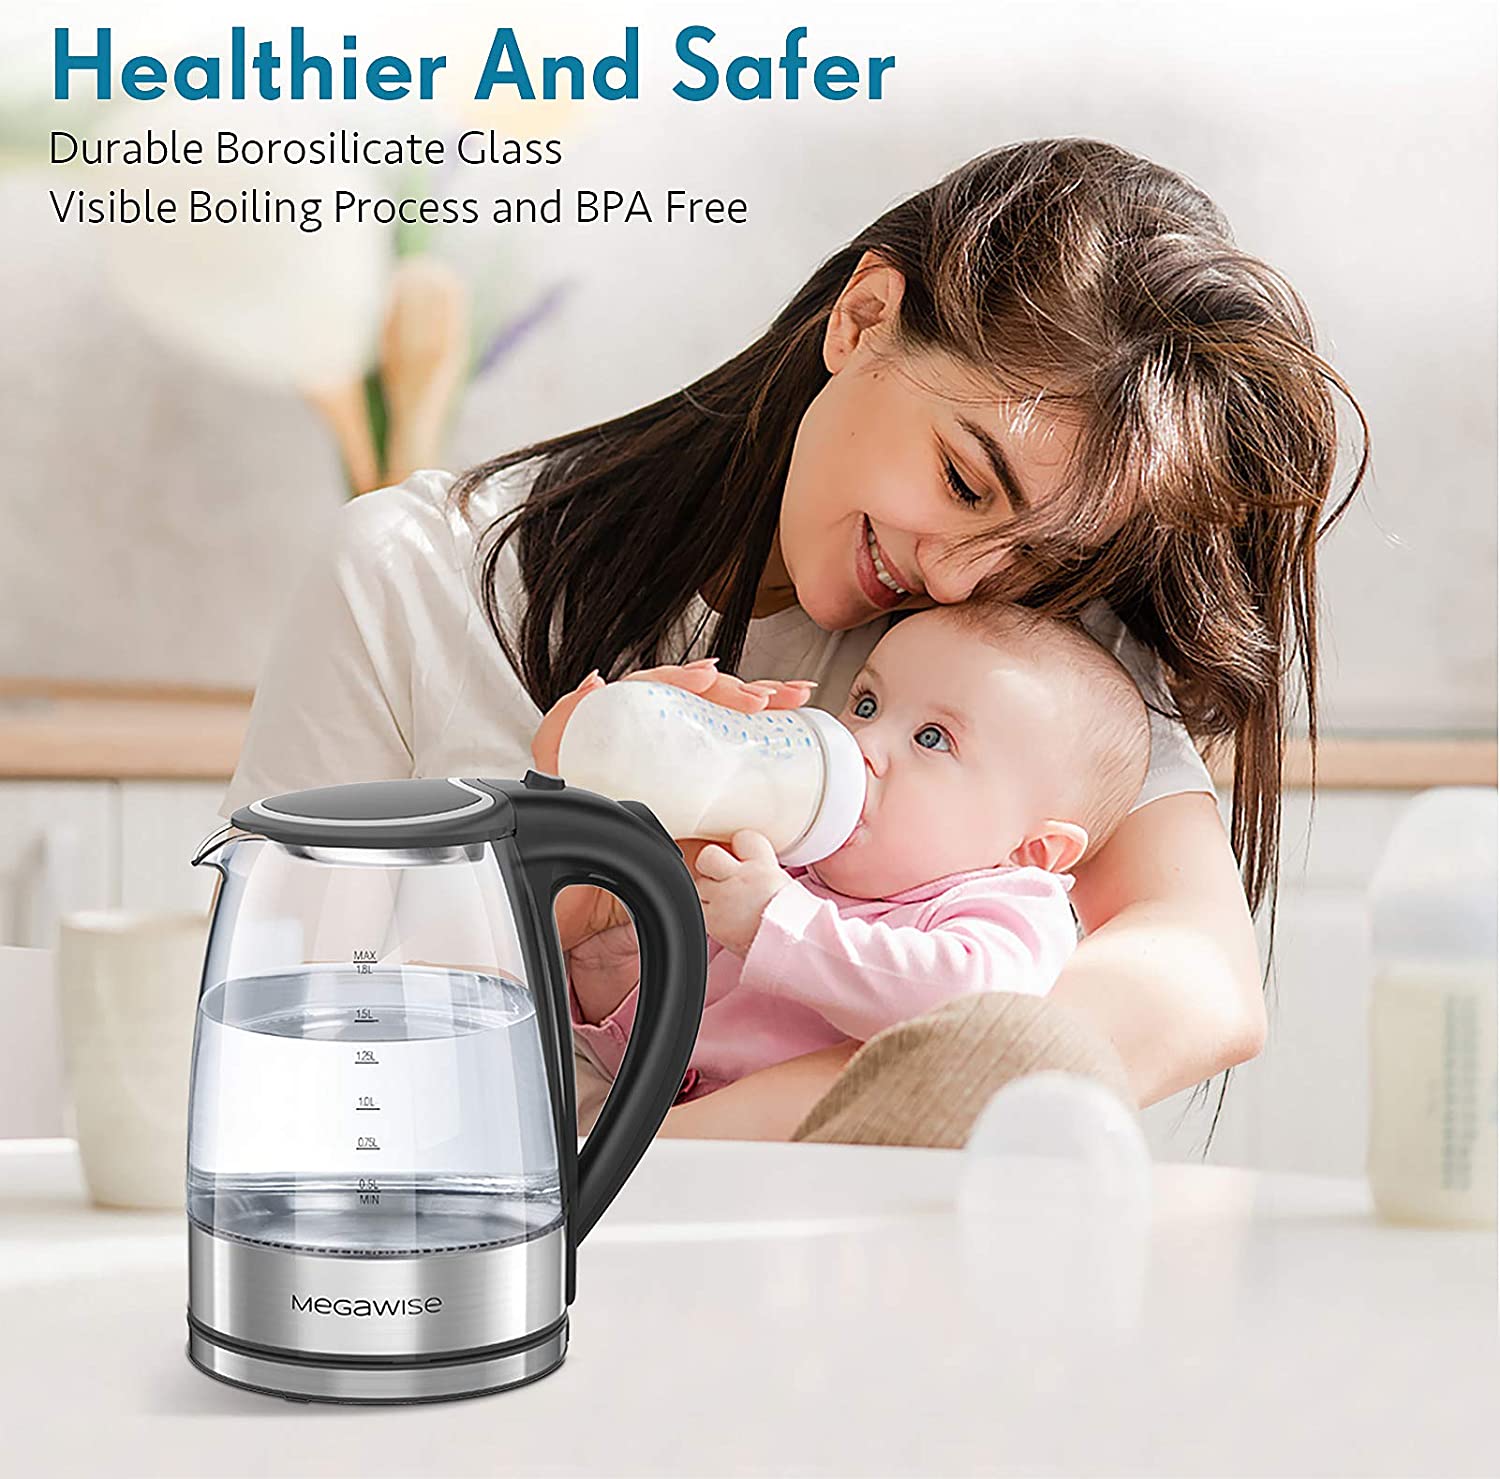  MEGAWISE 1.8L Healthy Electric Kettle, 1500W